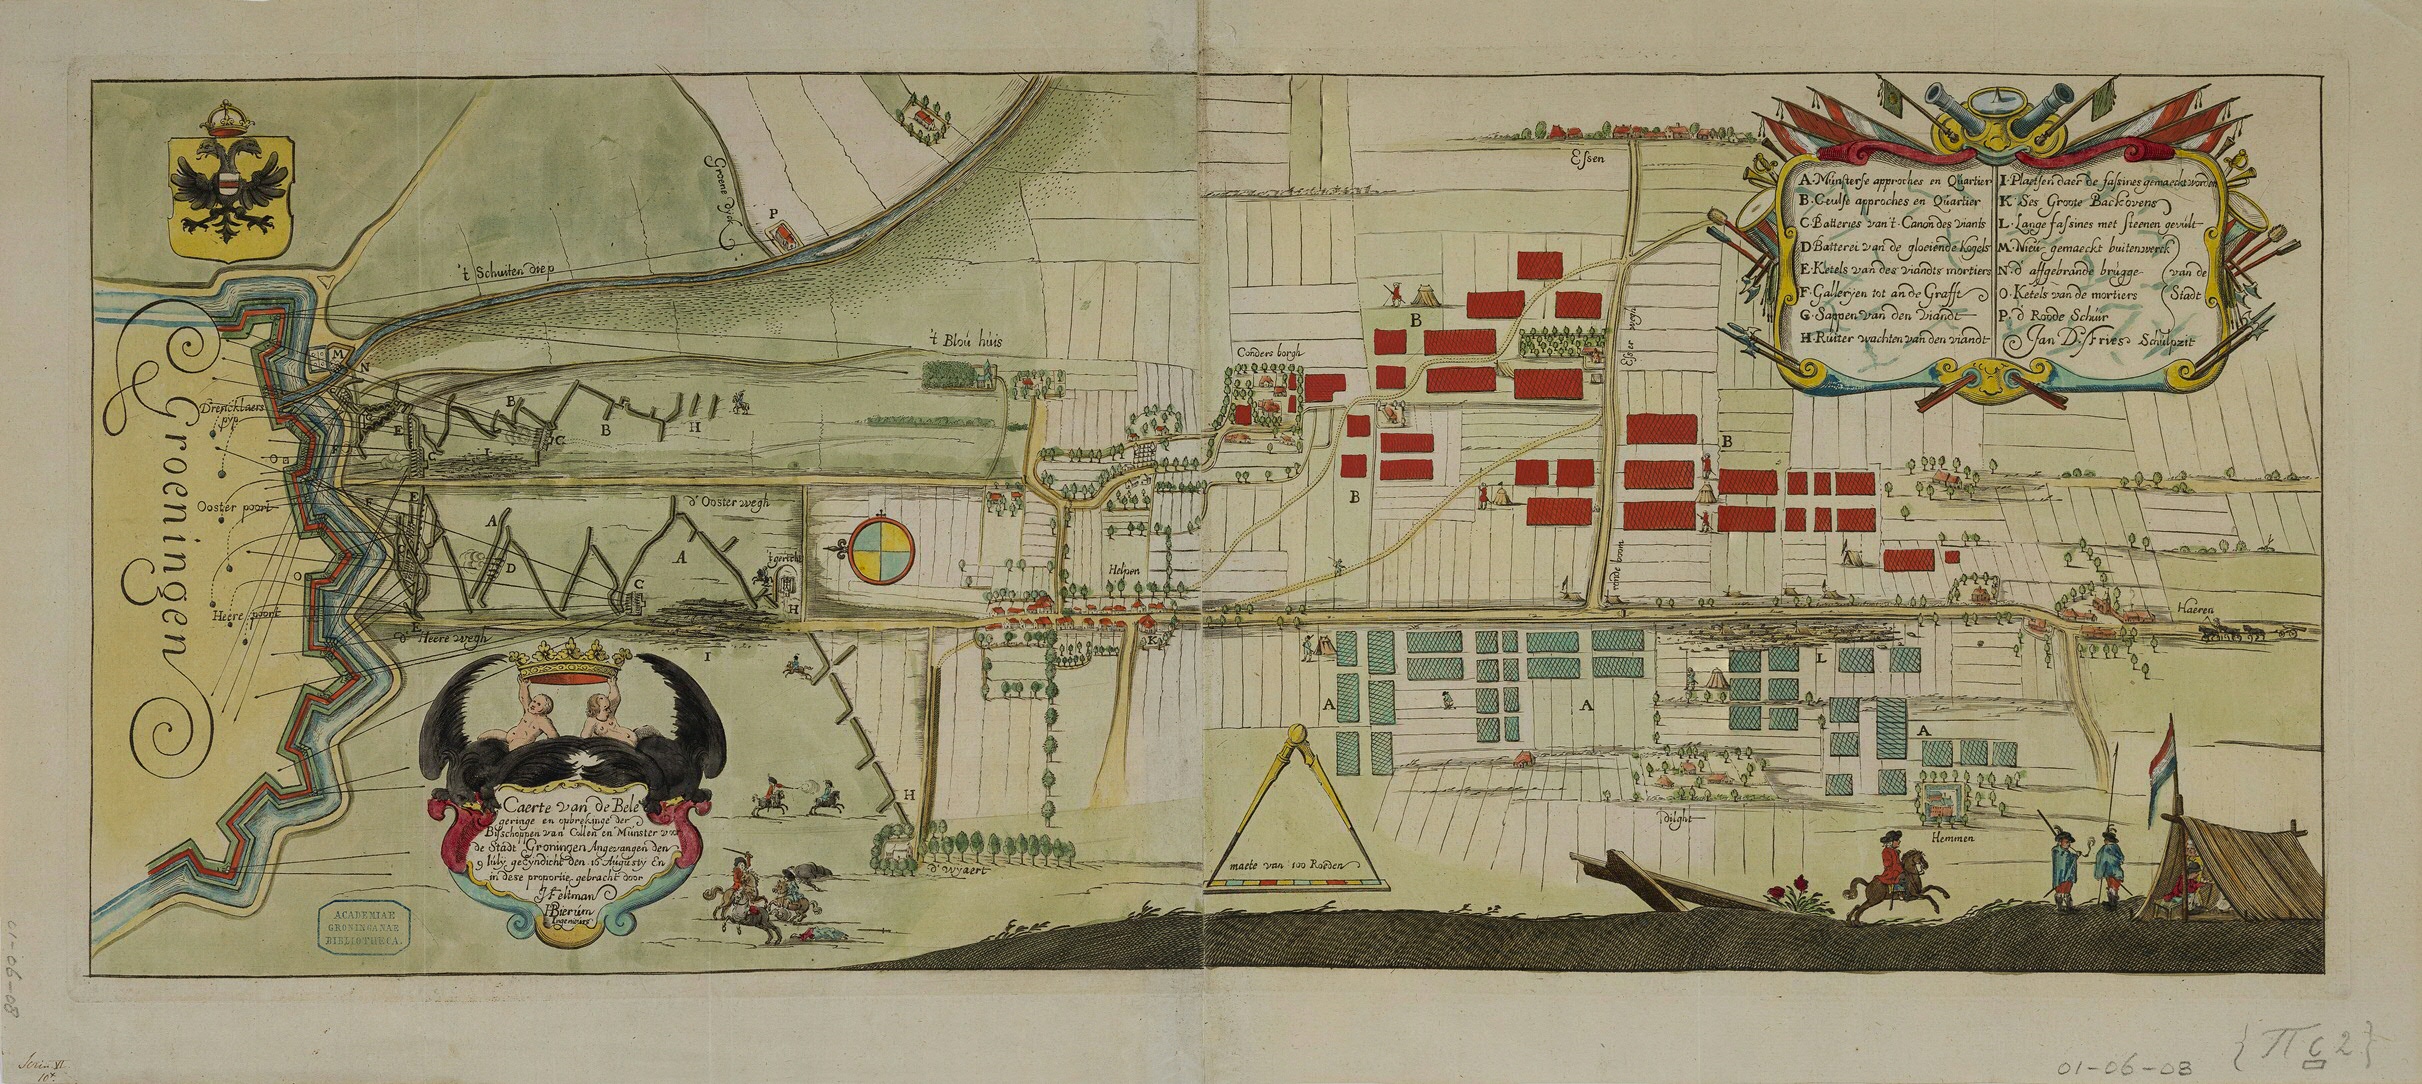 Ill. 1: ‘Map of the Siege of Groningen by the bishops of Co-logne and Münster, and the lifting of the Siege, begun on 9 July, ended on 16 August.’ Coloured copper engraving by Jan de Fries based on a drawing by the surveyors Joannes Feltman and Hendrick Bierum. University of Groningen Li-brary (UGL), uklu 01-06-08